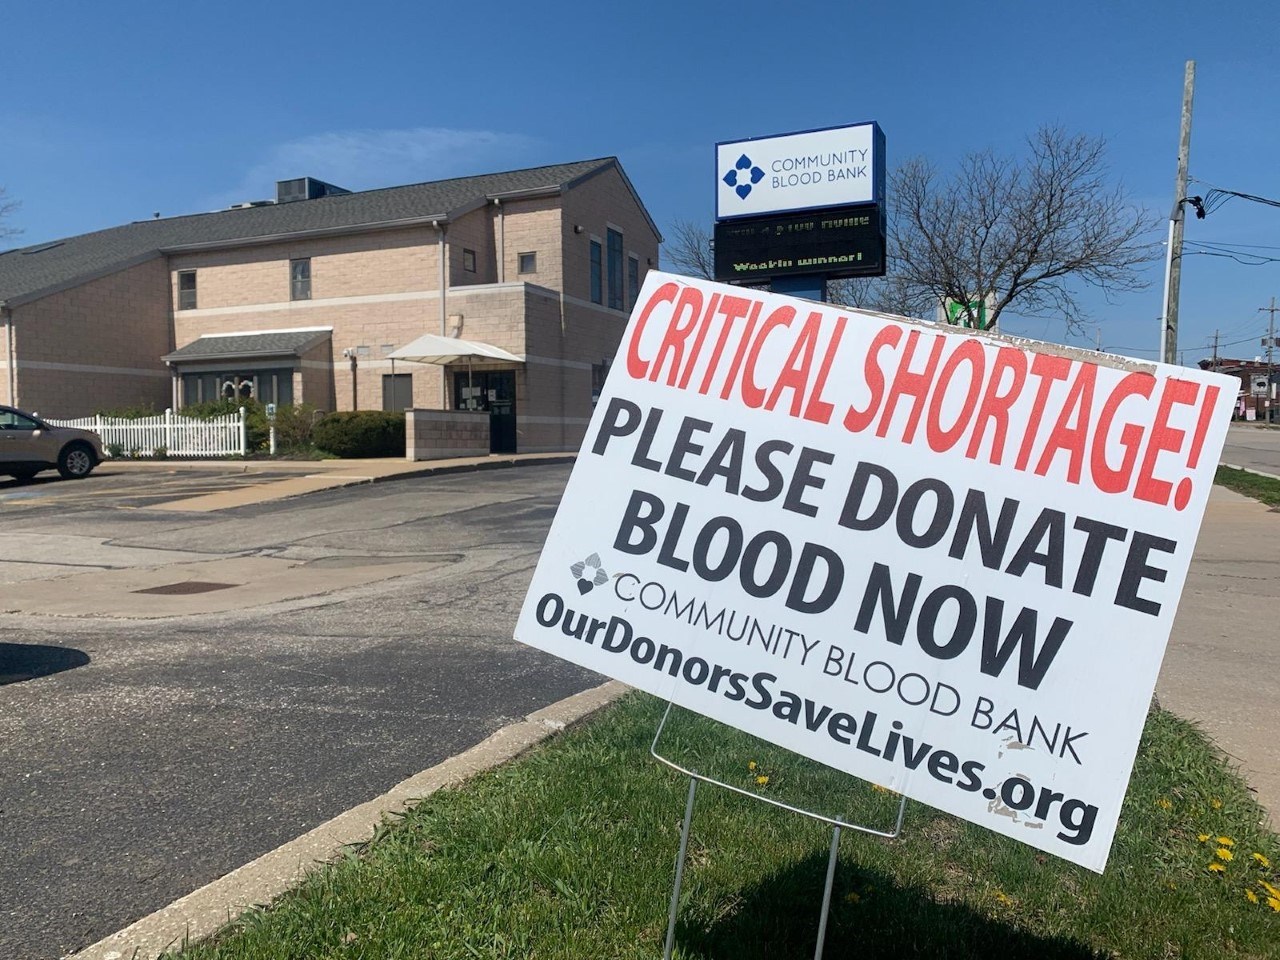 Community Blood Bank in Urgent Need of Donors